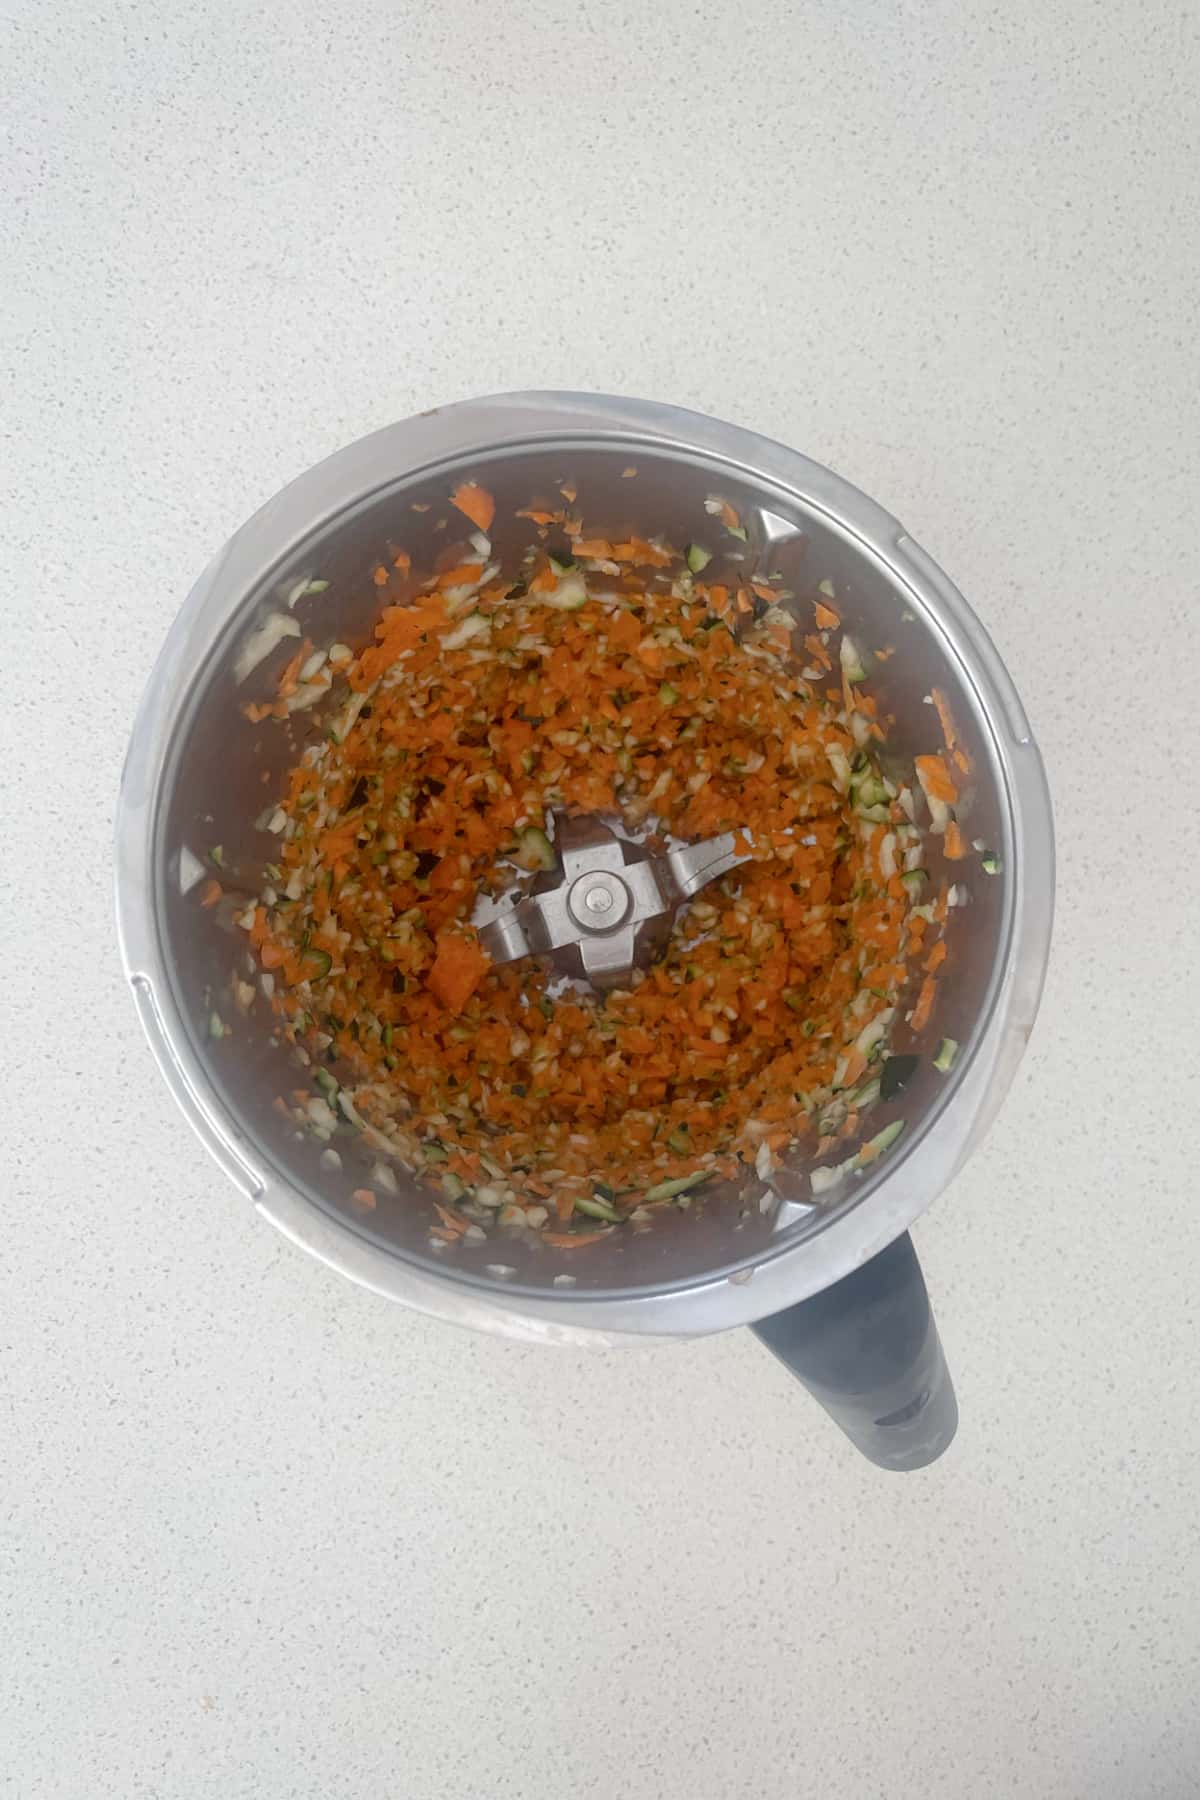 Grated carrot and zucchini in a thermomix bowl.